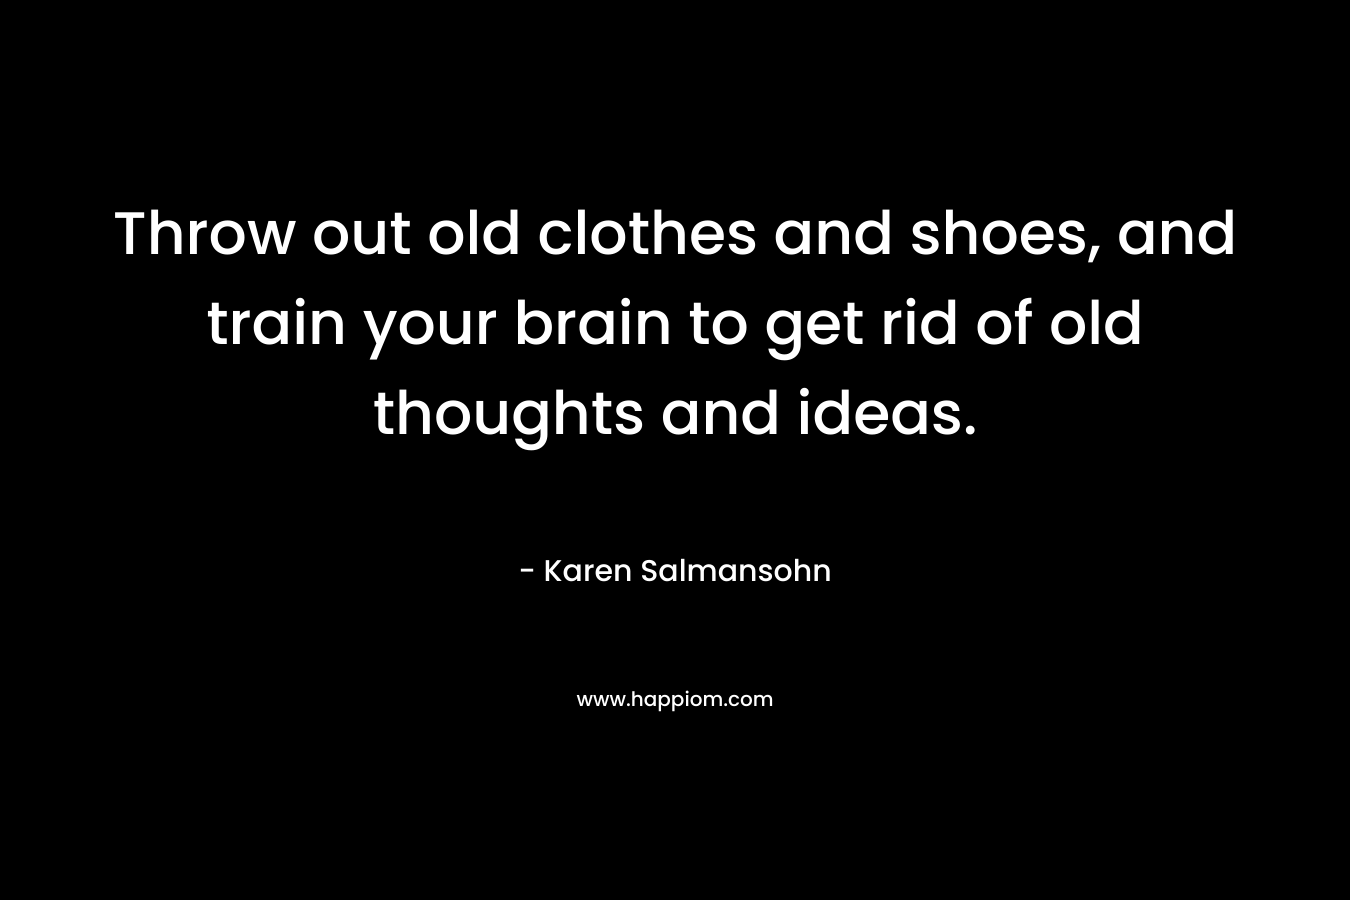 Throw out old clothes and shoes, and train your brain to get rid of old thoughts and ideas.